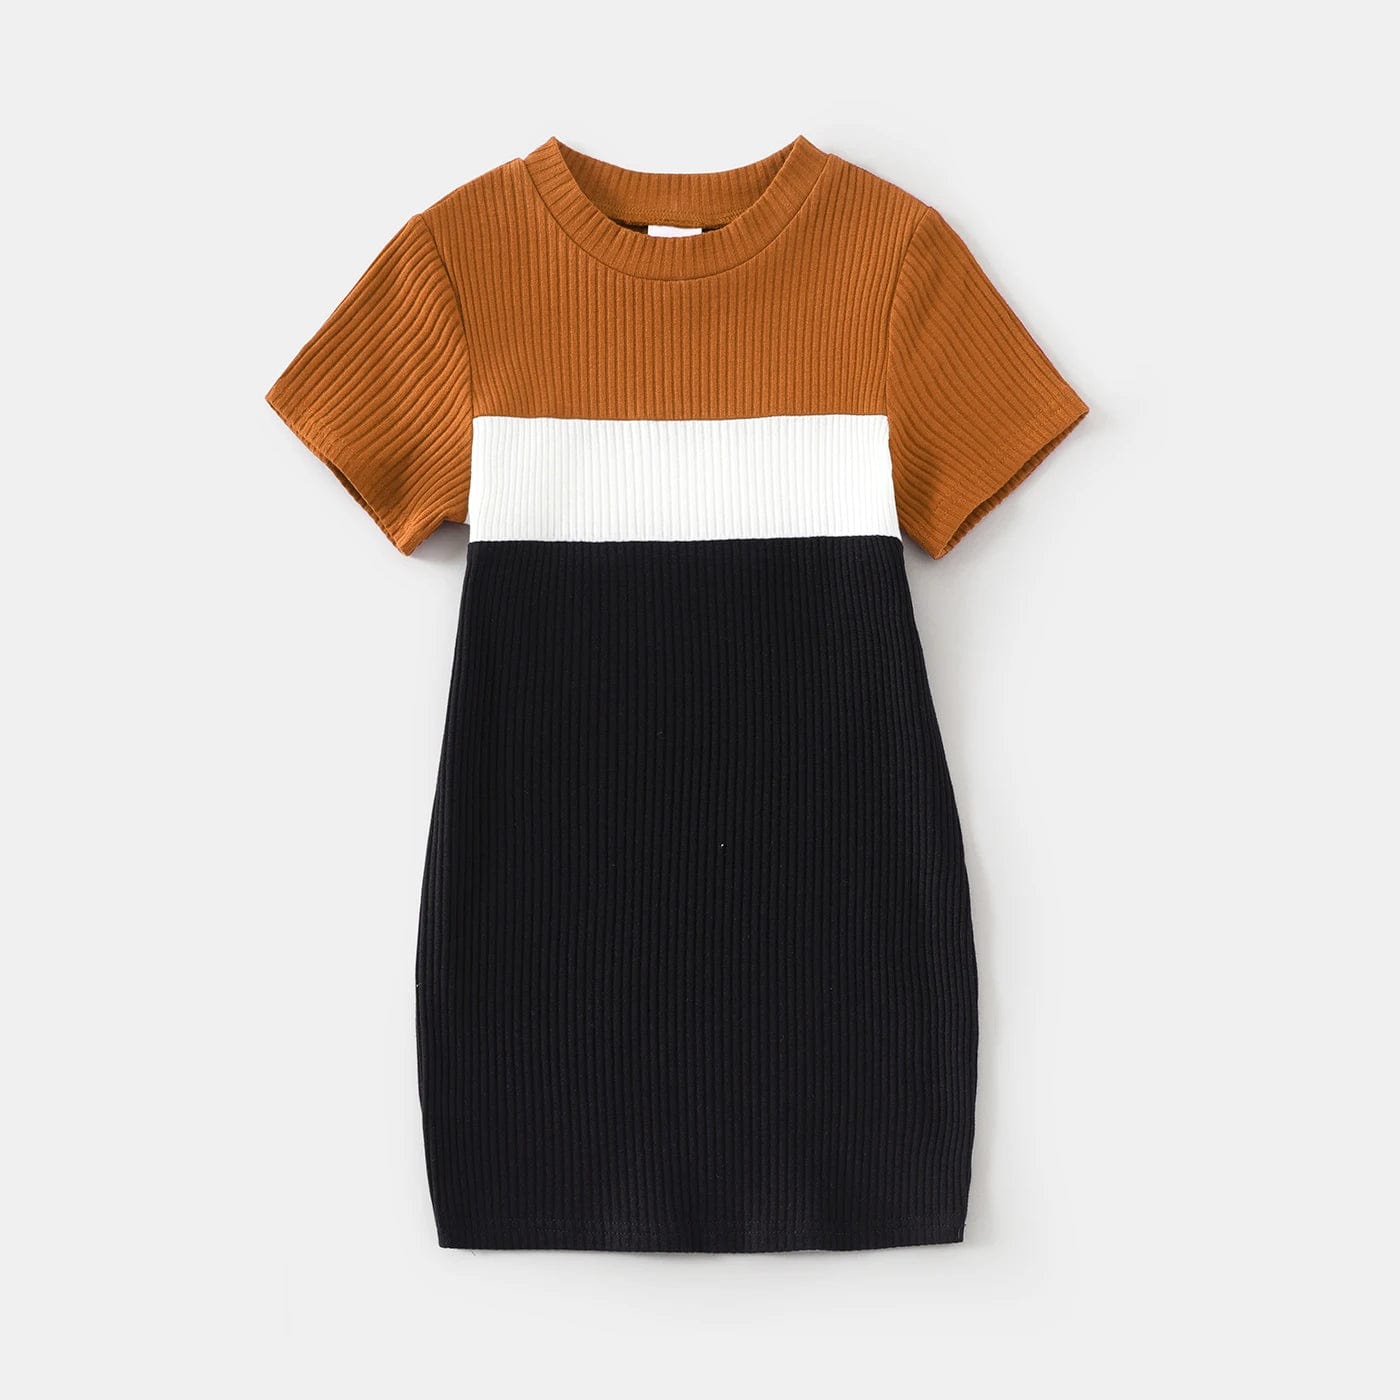 PatPat Family Matching Outfits Cotton Short-sleeve Colorblock Rib Knit Mock Neck Bodycon Dresses and Tops Short-sleeve Tee Sets